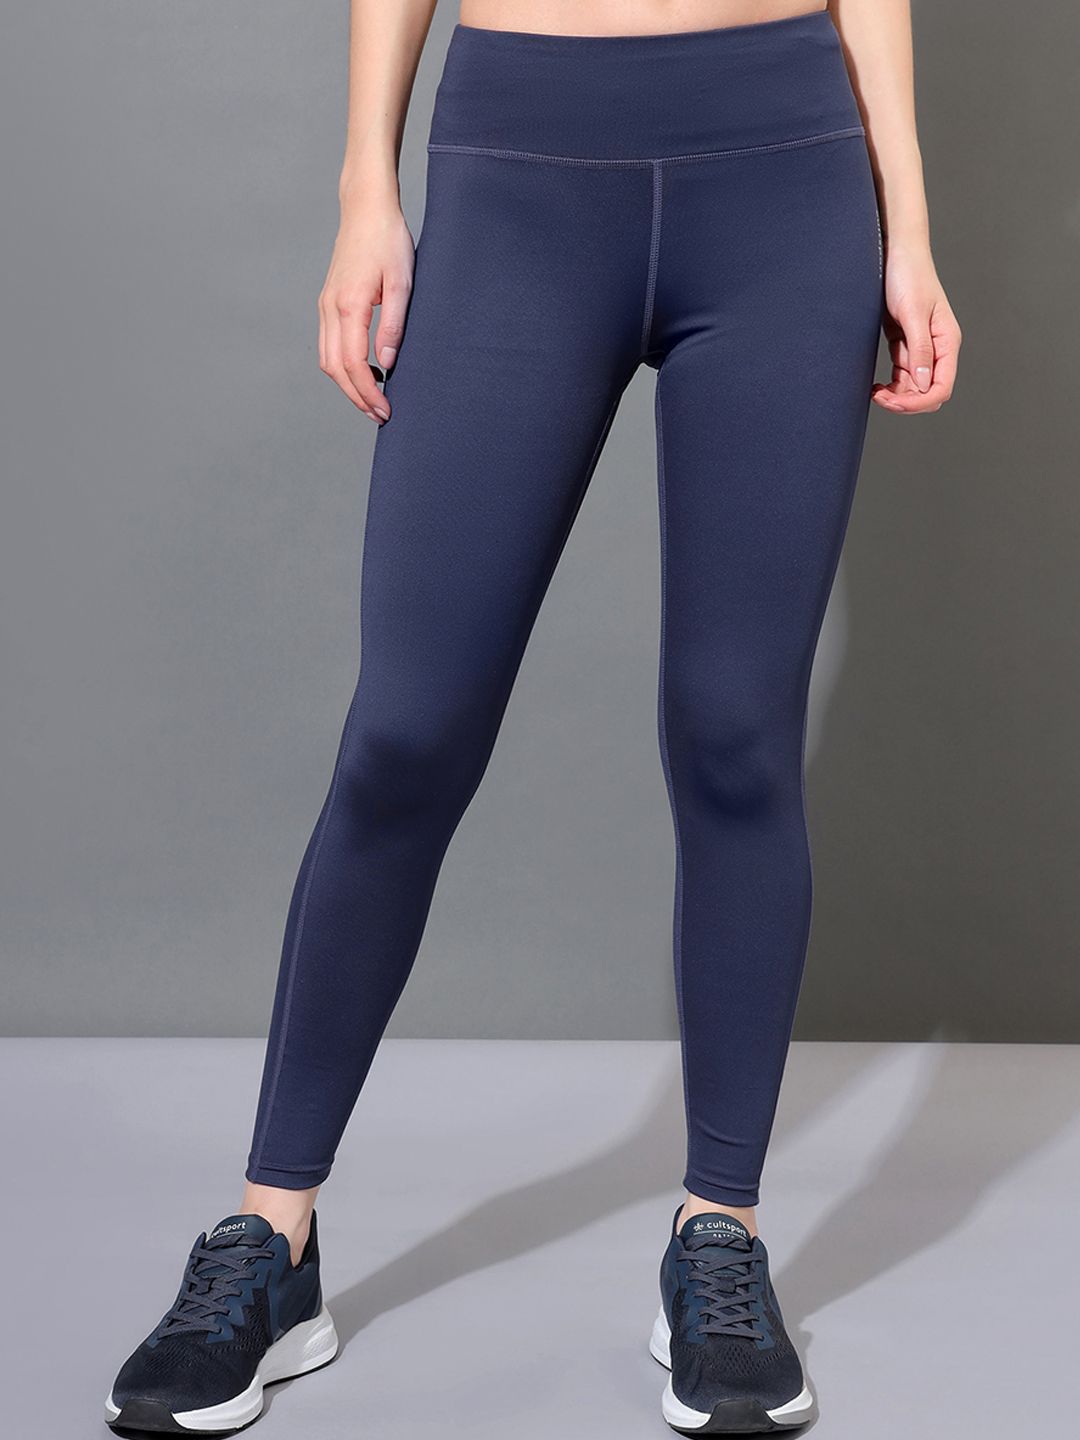 cultsportone Women Navy Blue Solid Ankle-Length Tights Price in India